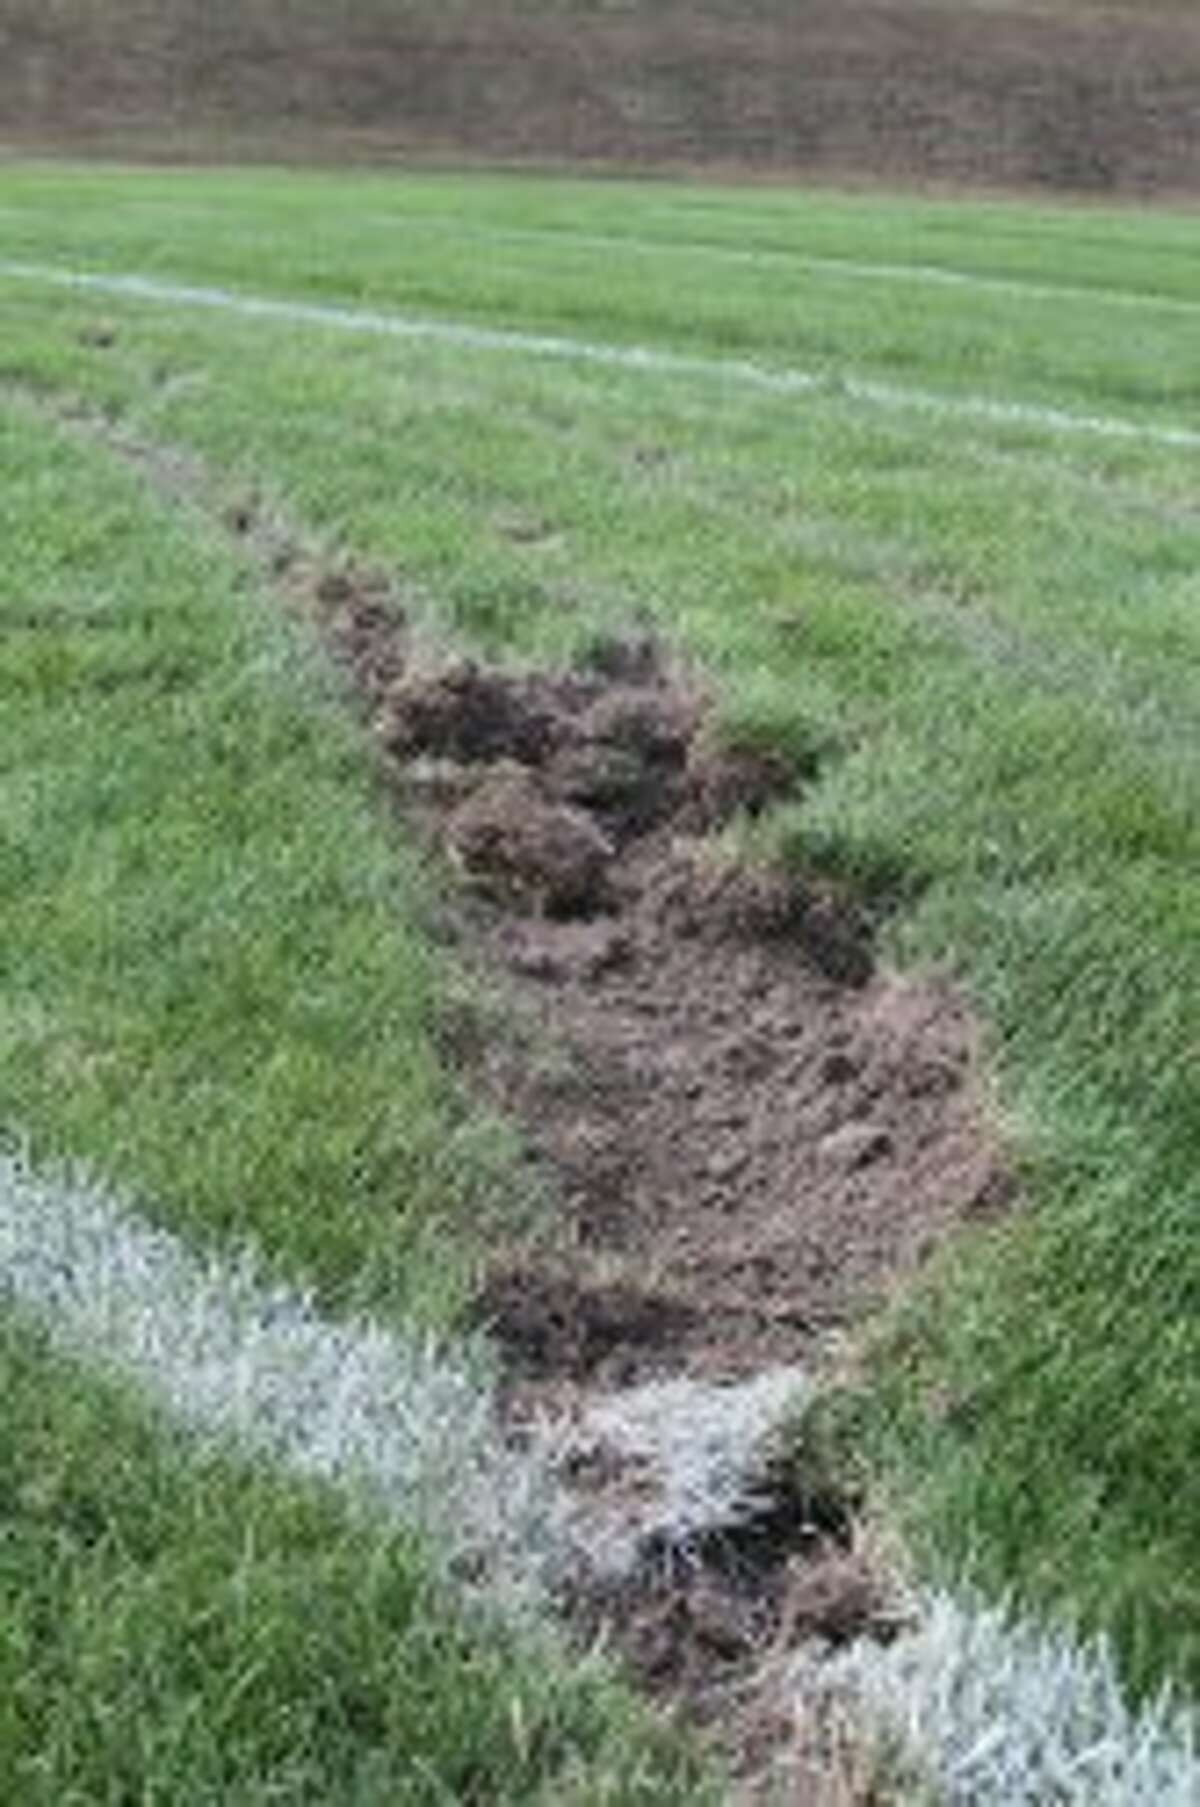 A vandal drove their vehicle onto the Saber Stadium field and ripped up chunks of the turf. (Matt Wenzel/News Advocate)